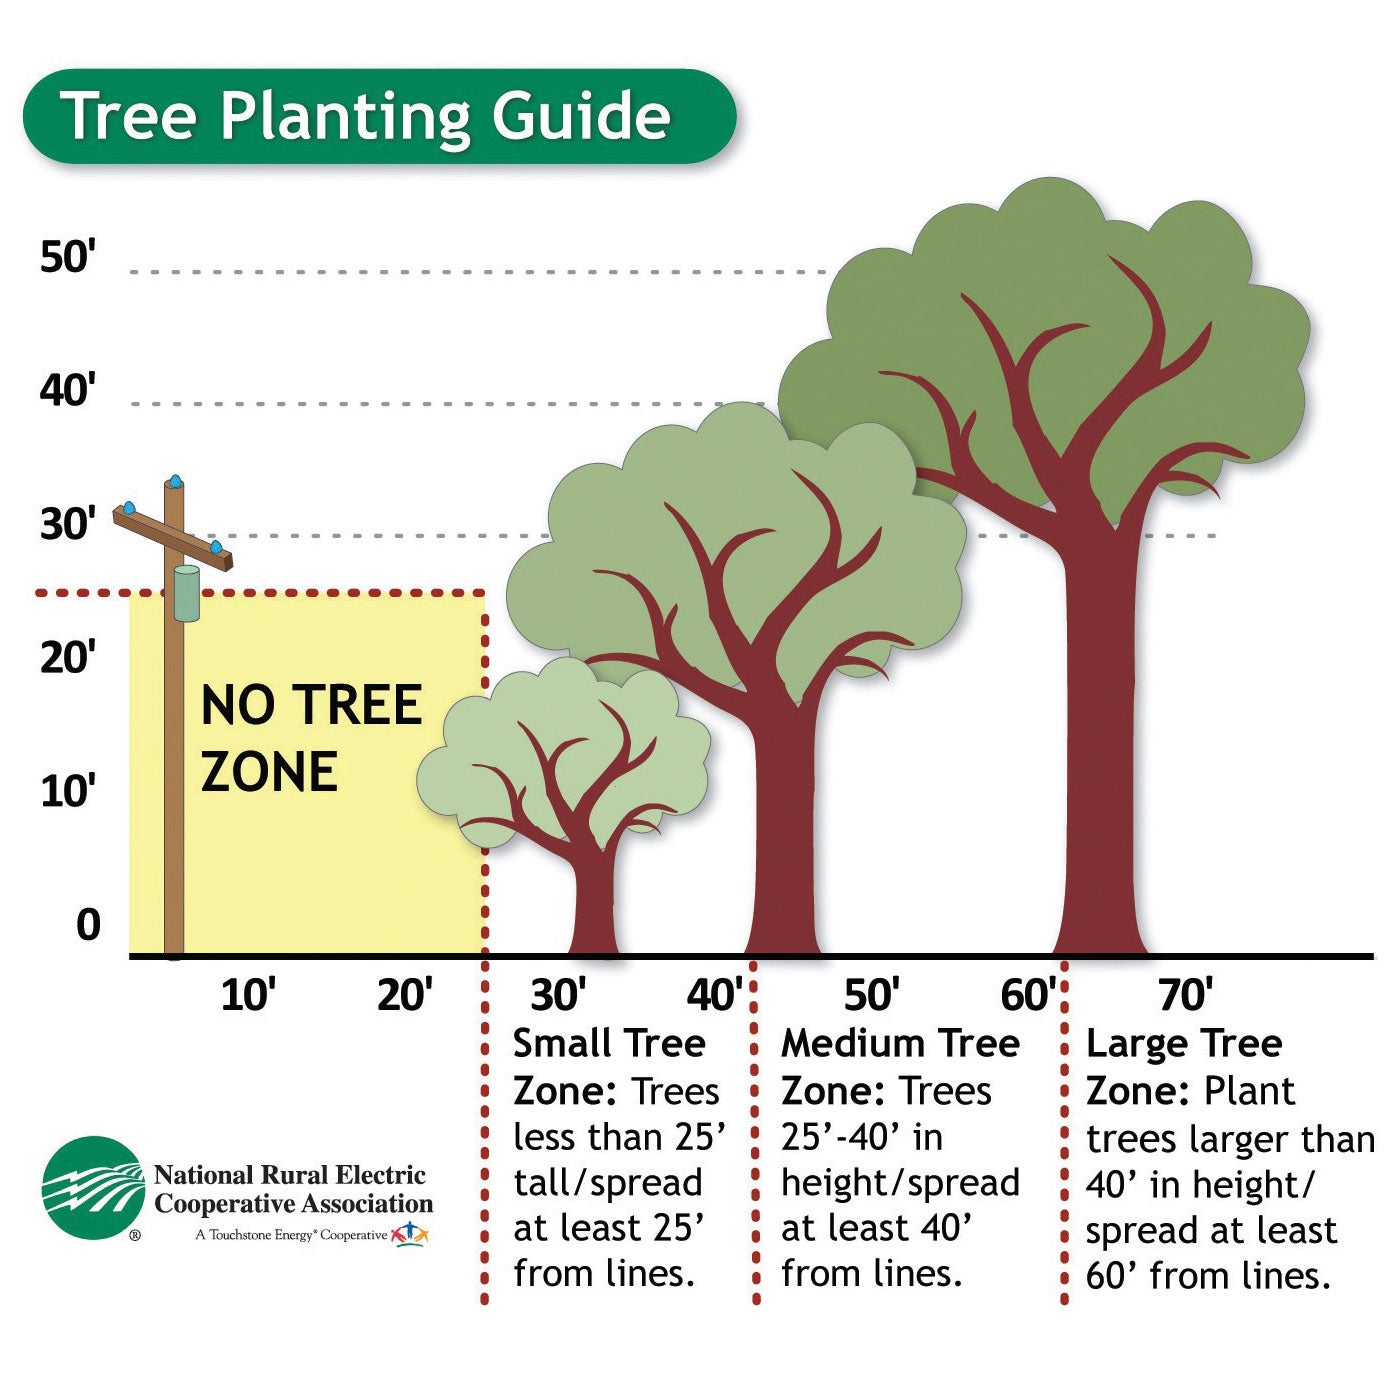 Tree planting guide